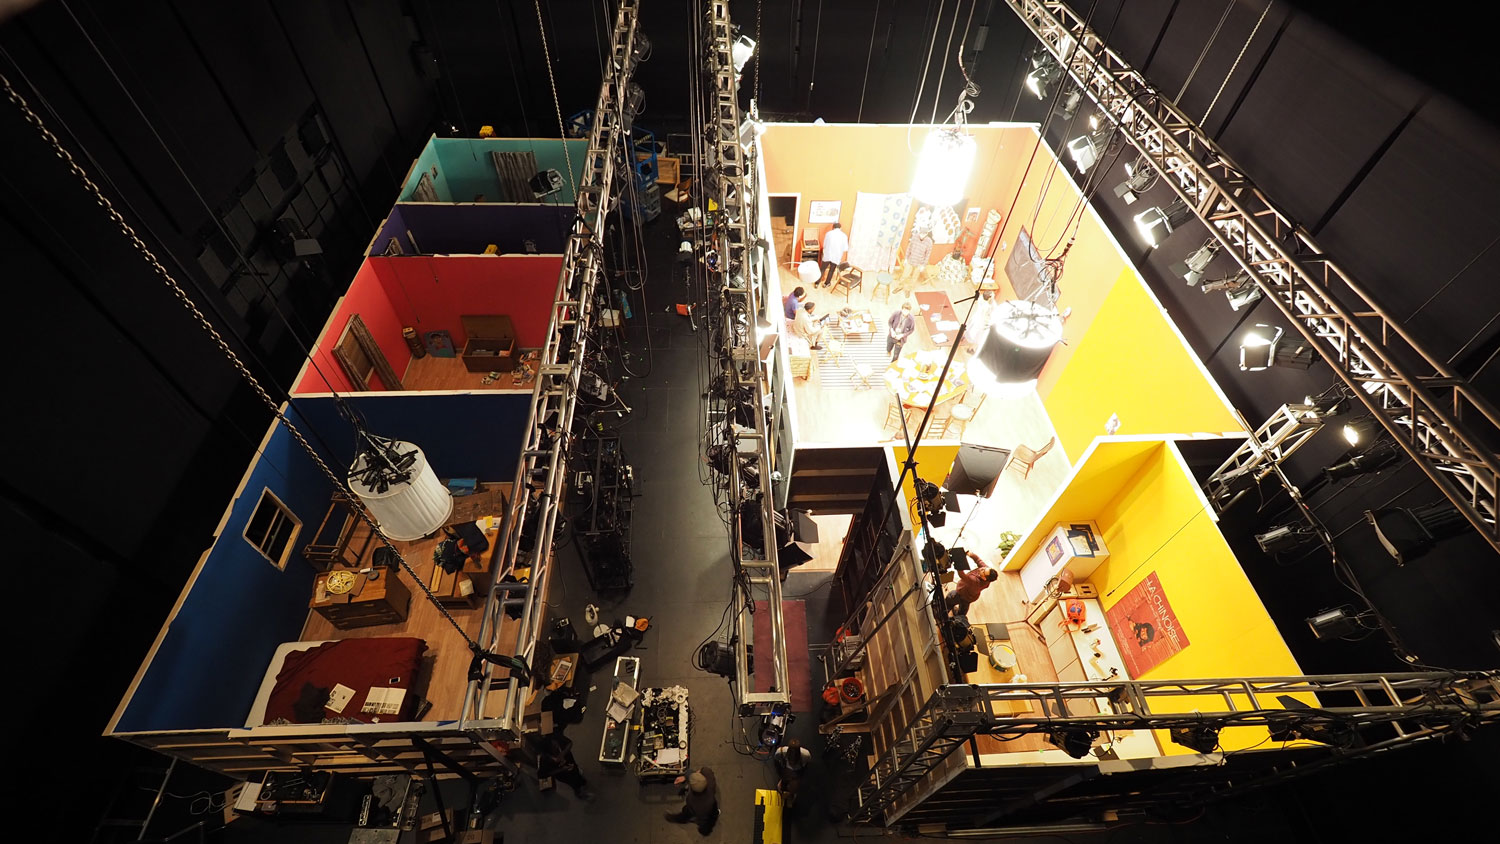 An aerial view of an entire film set of colorful rooms built in black box theater. 